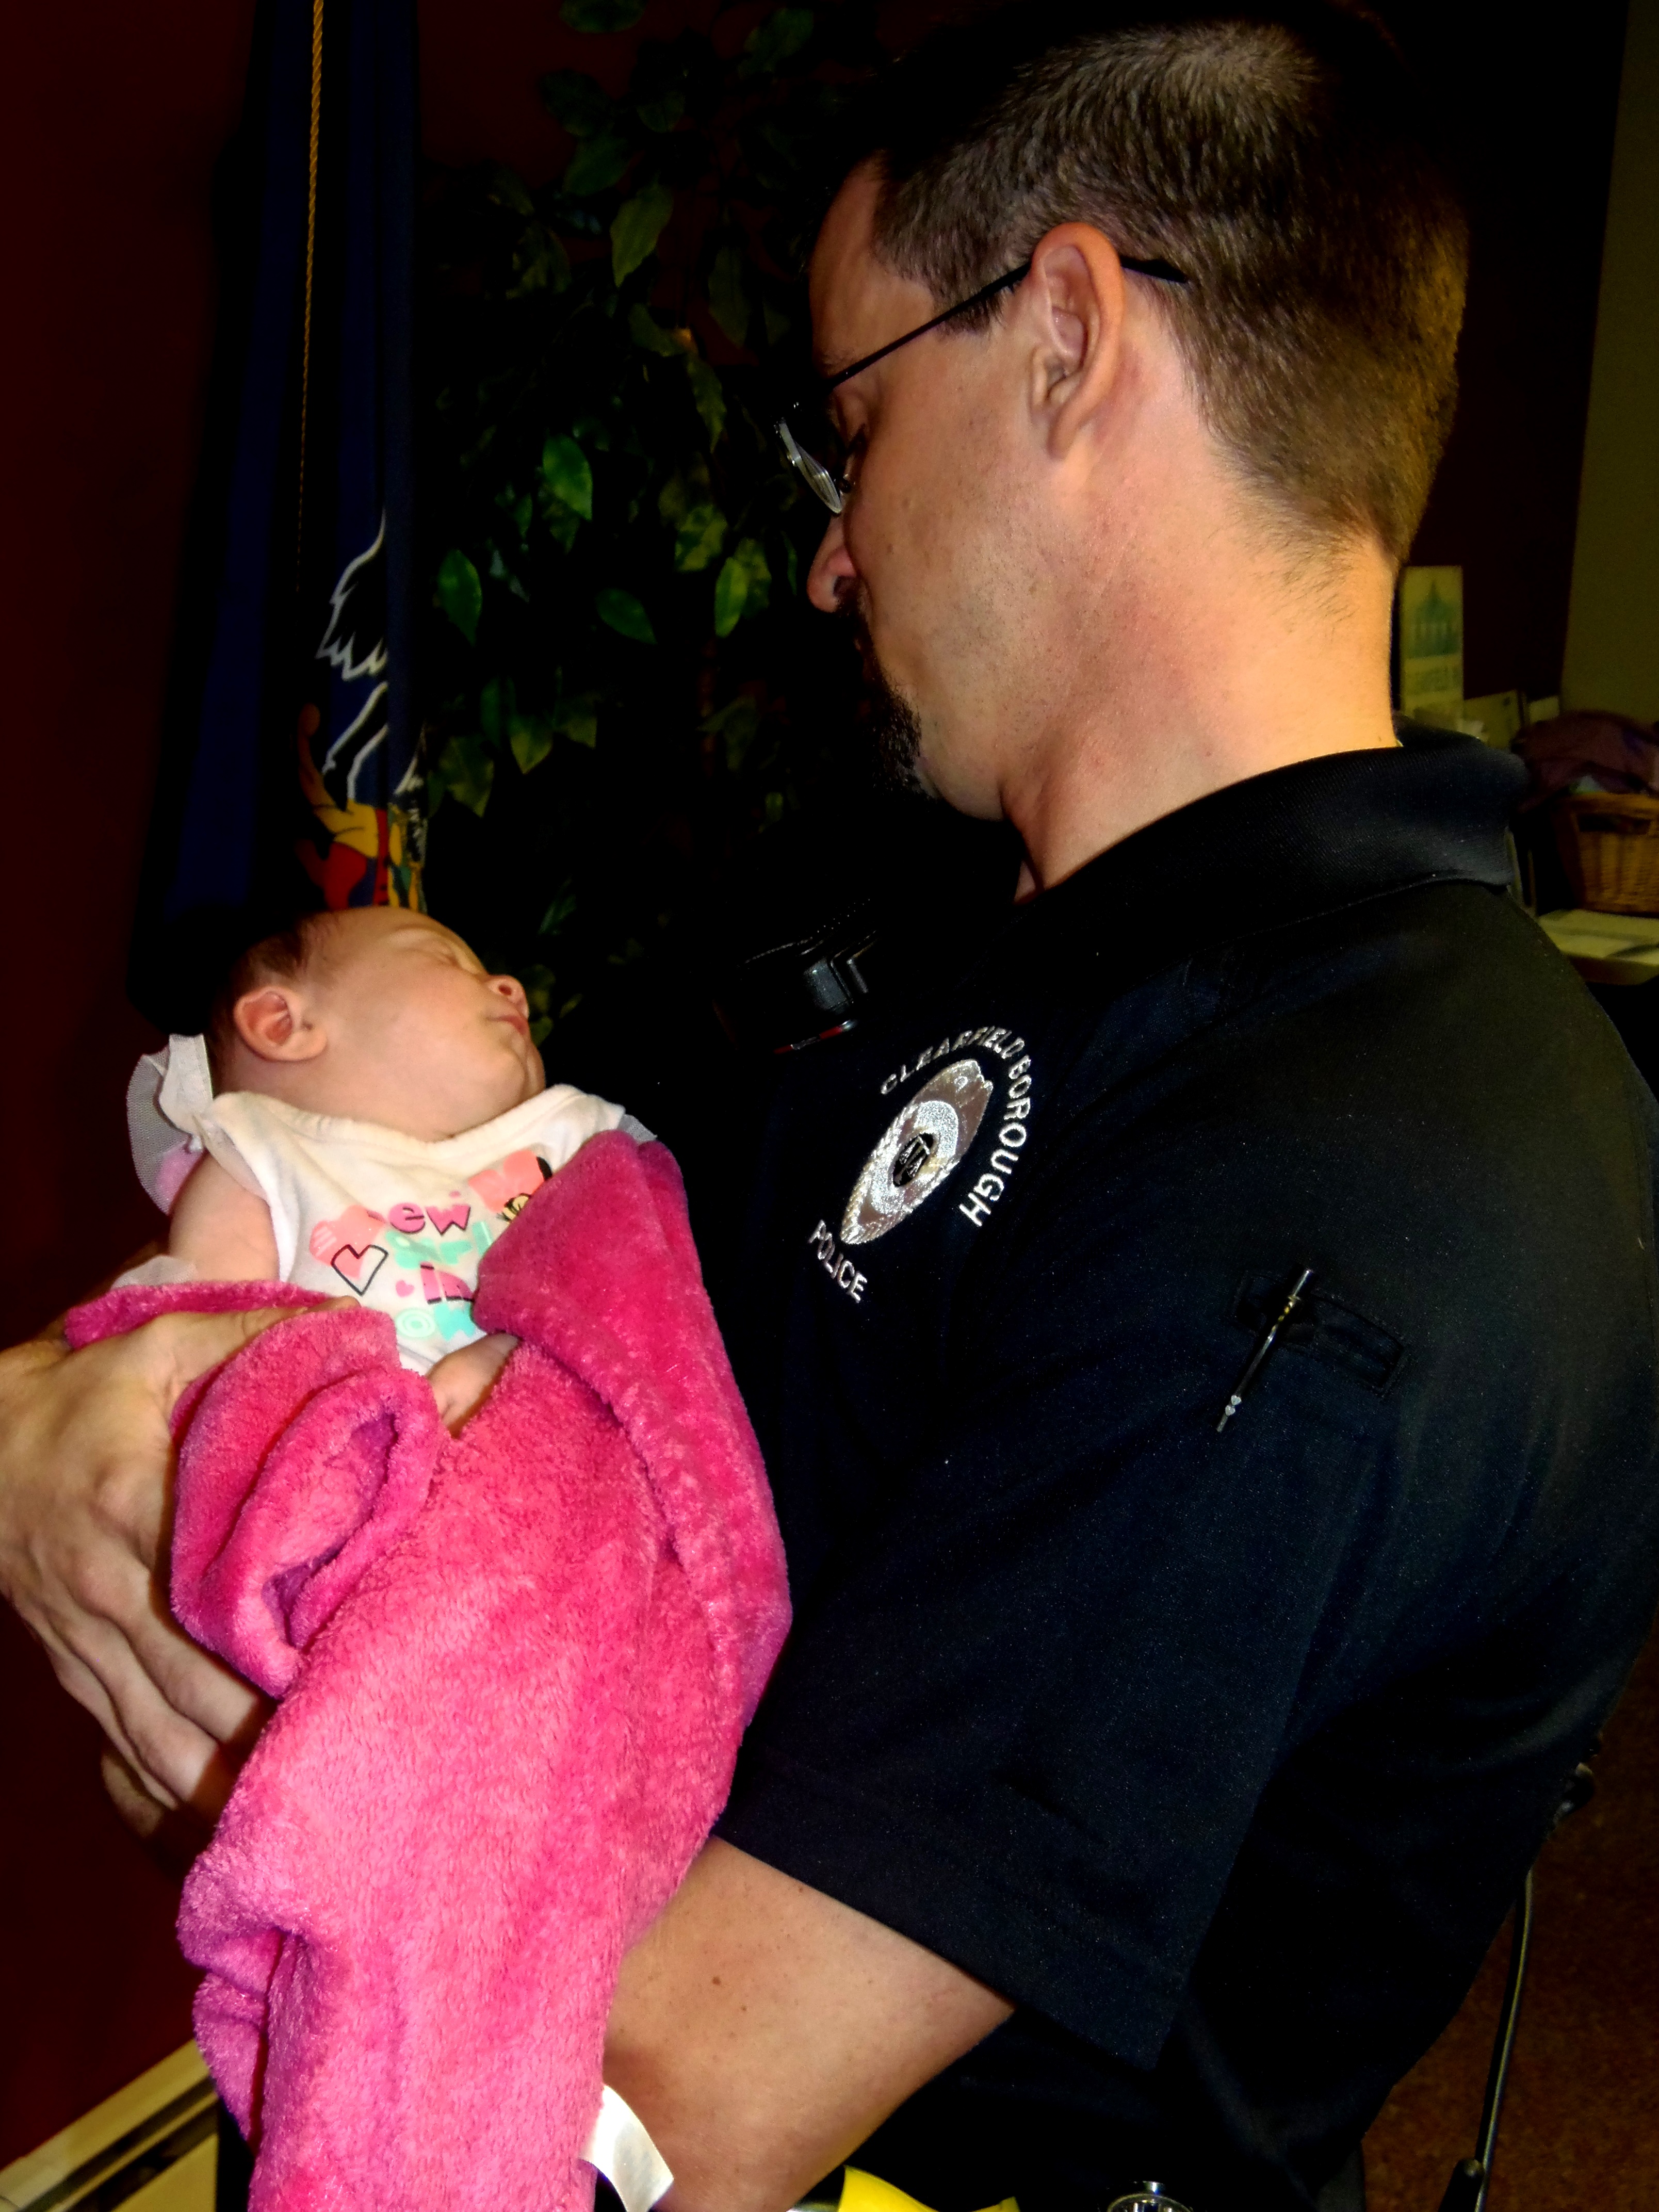 Officer Nathan Curry of Clearfield Borough police is shown holding baby Kiara. (Photo by Jessica Shirey)